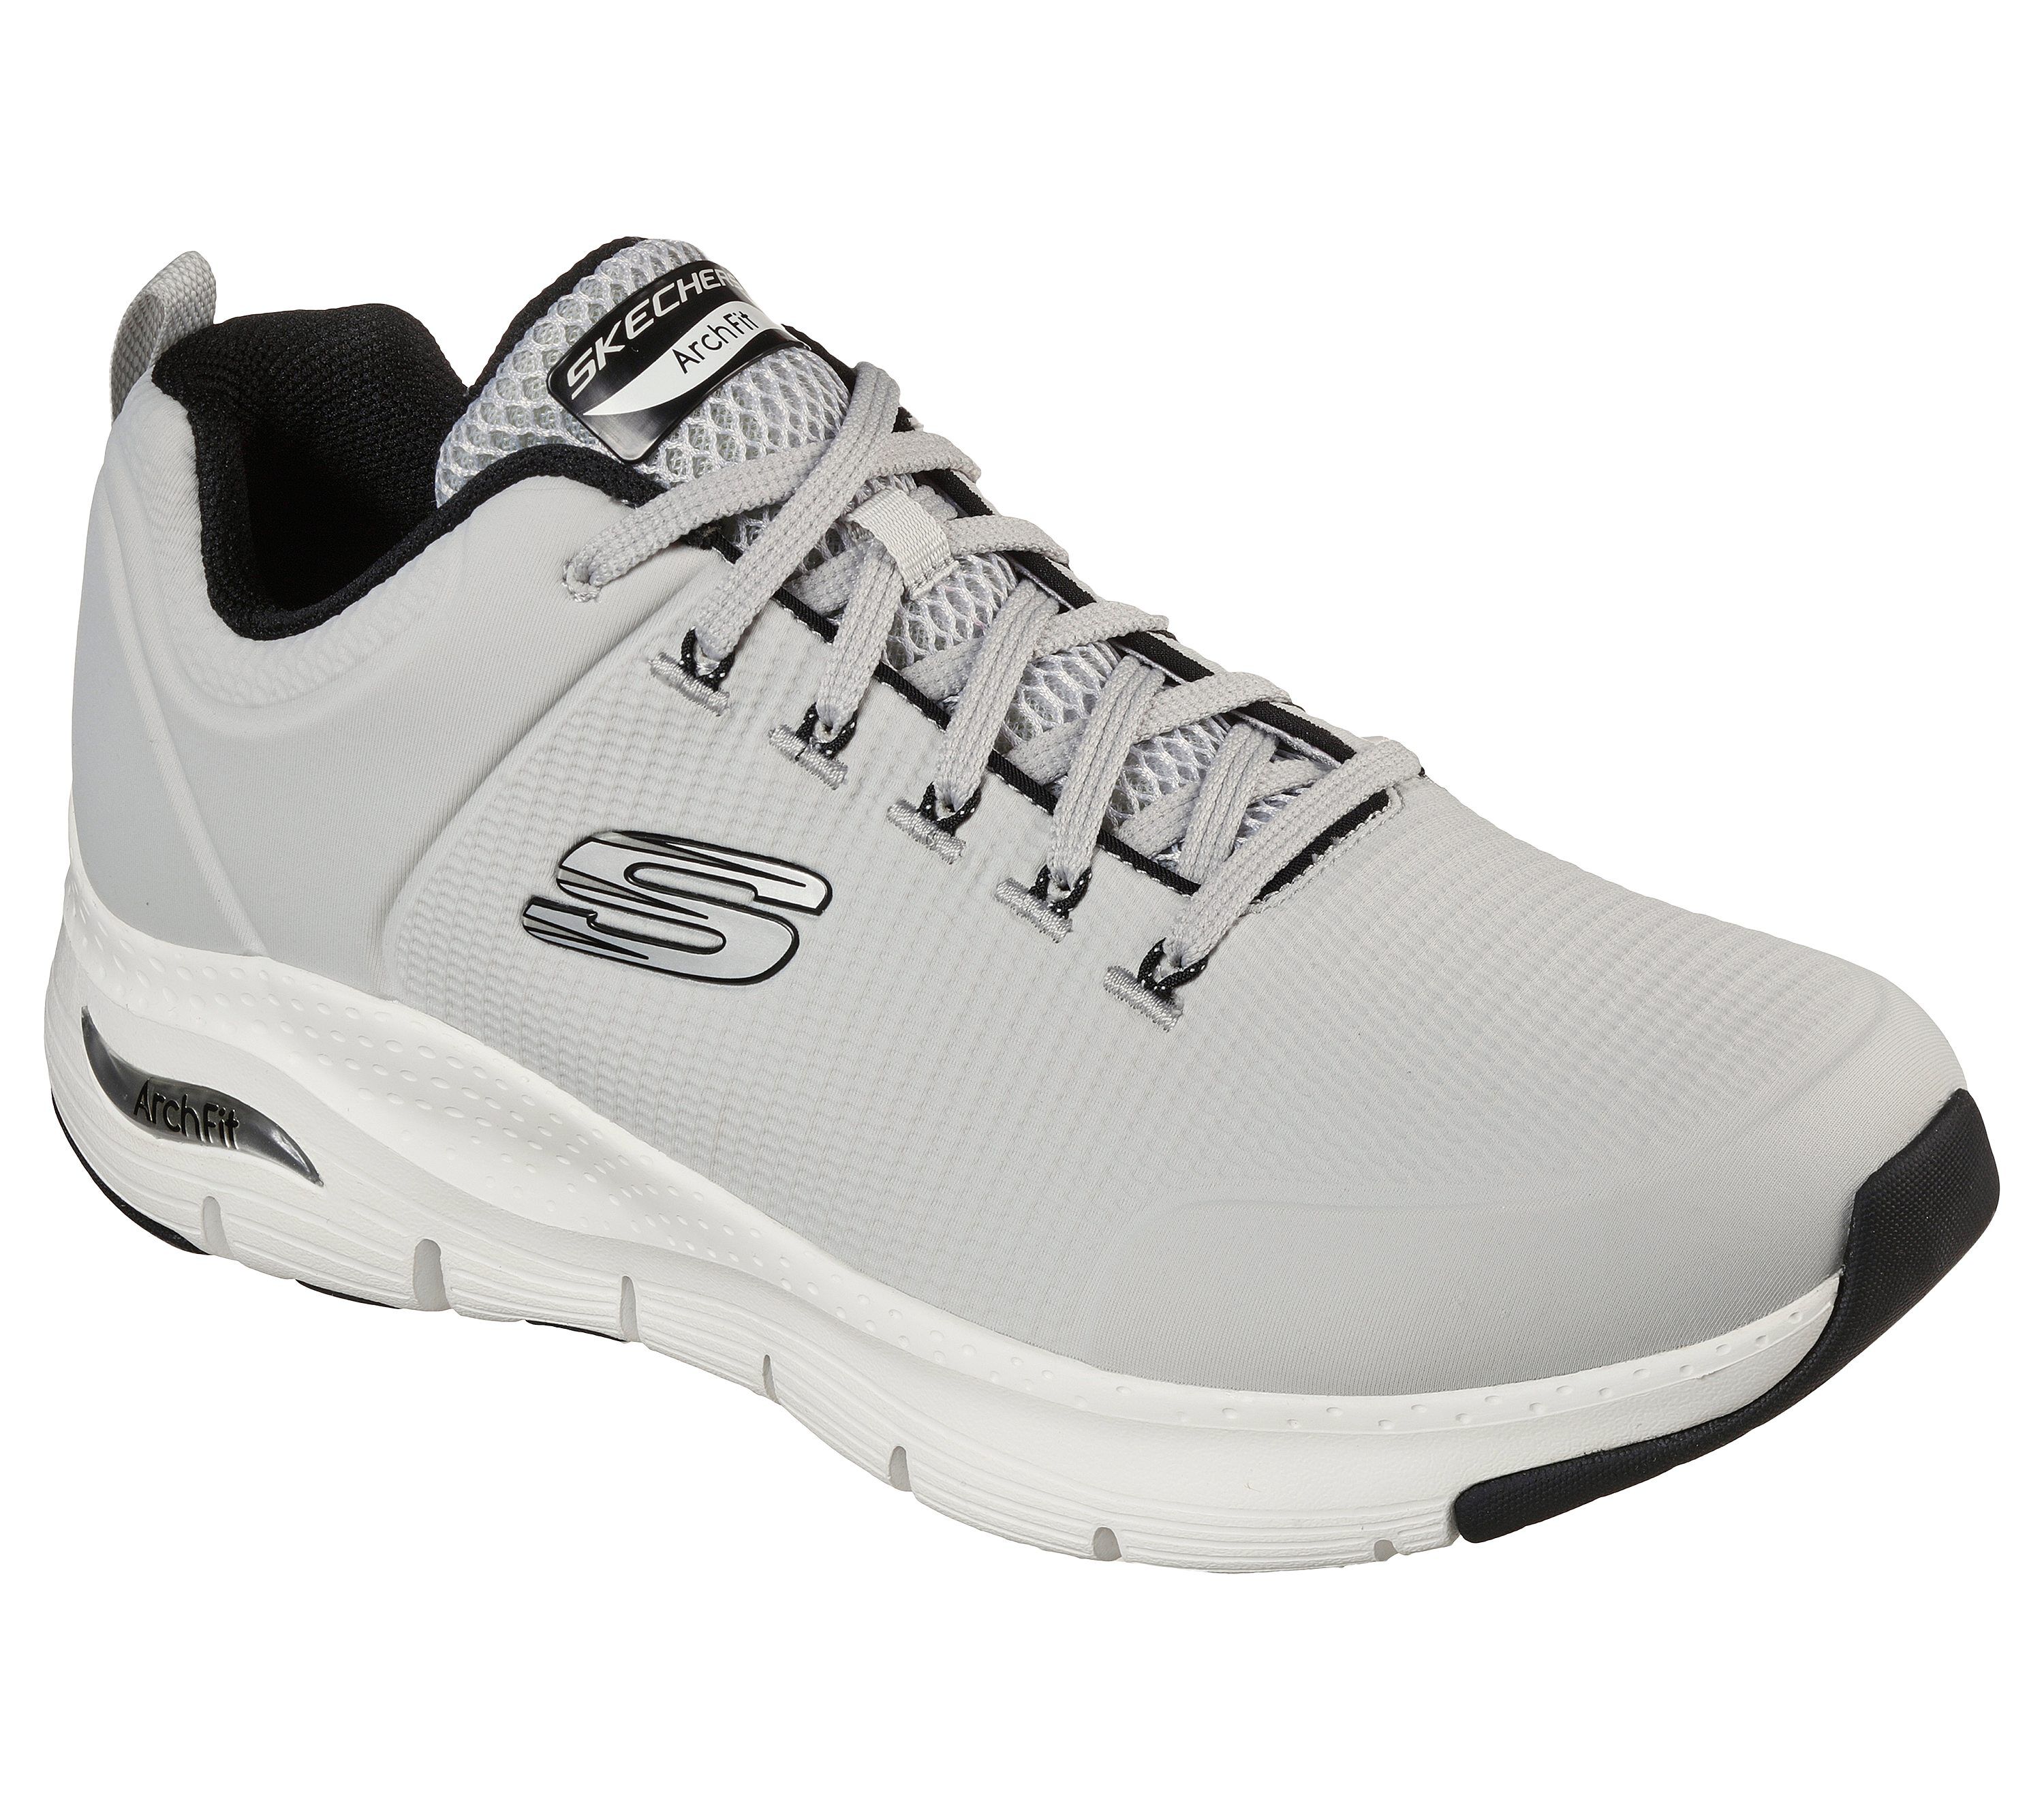 extra wide skechers athletic shoes